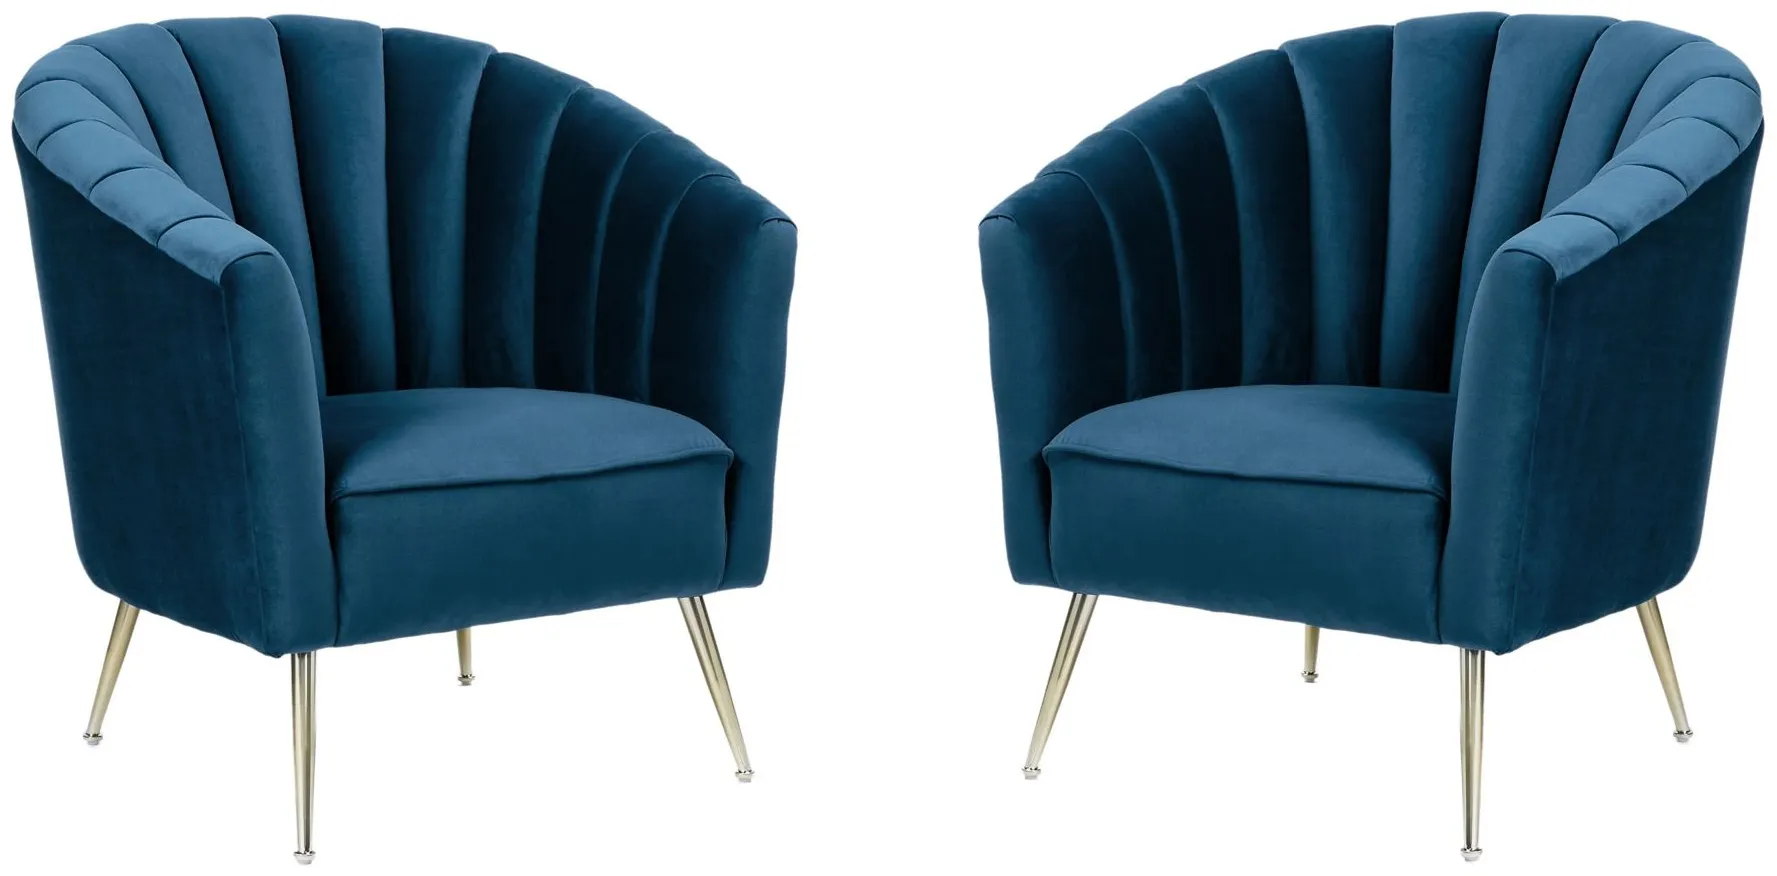 Rosemont Accent Chair (Set of 2) in Blue and Gold by Manhattan Comfort